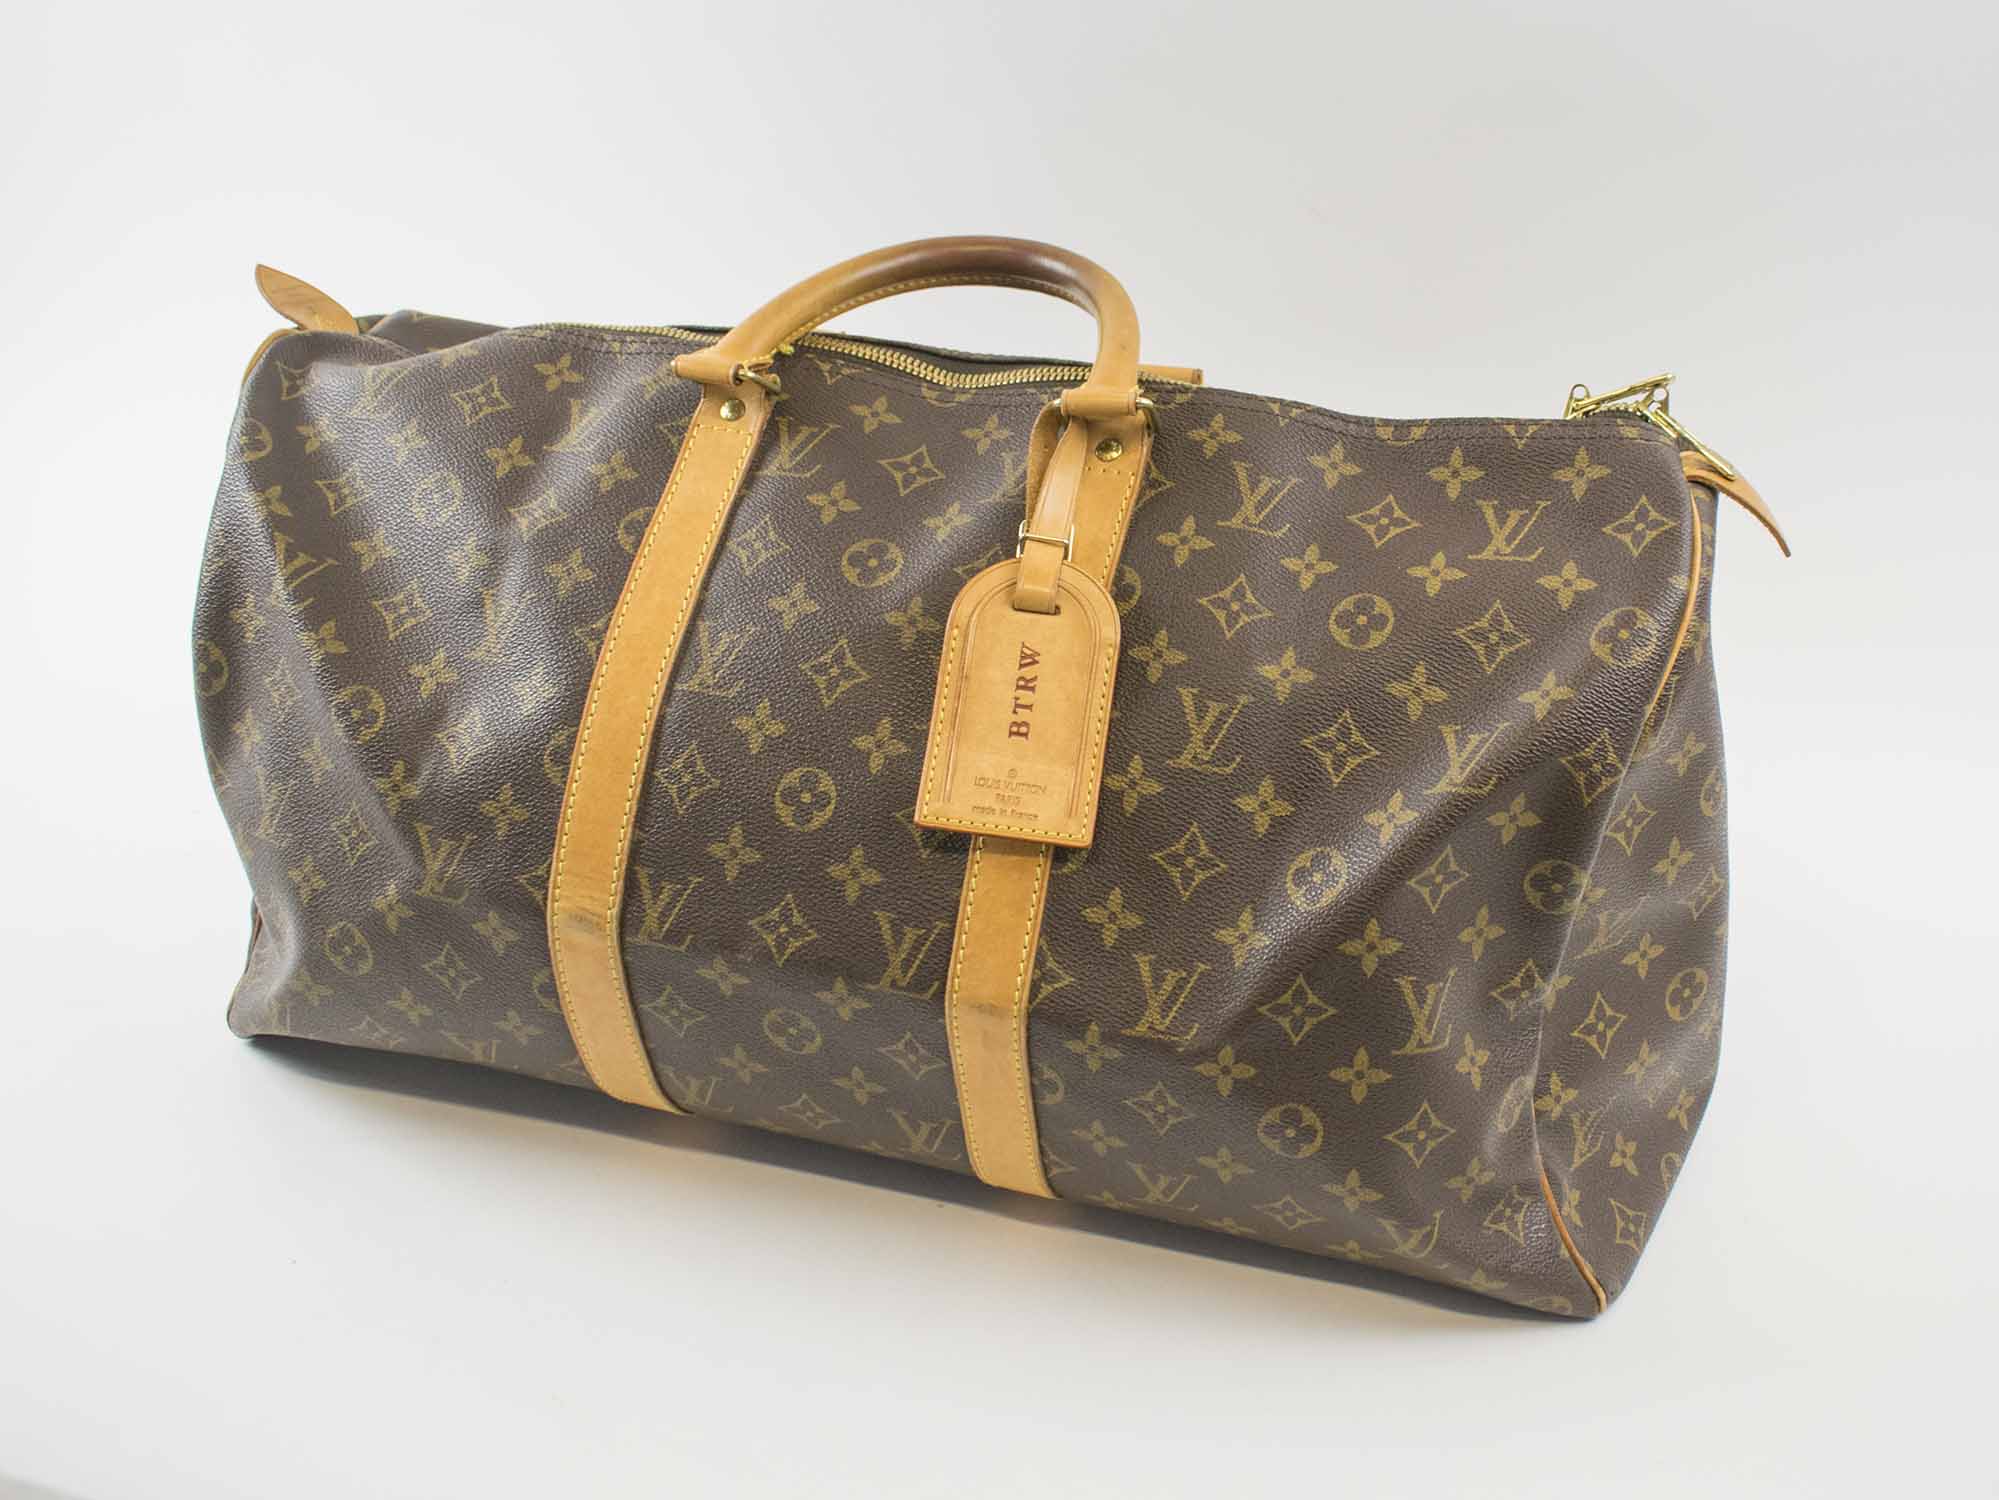 lv bag with initials